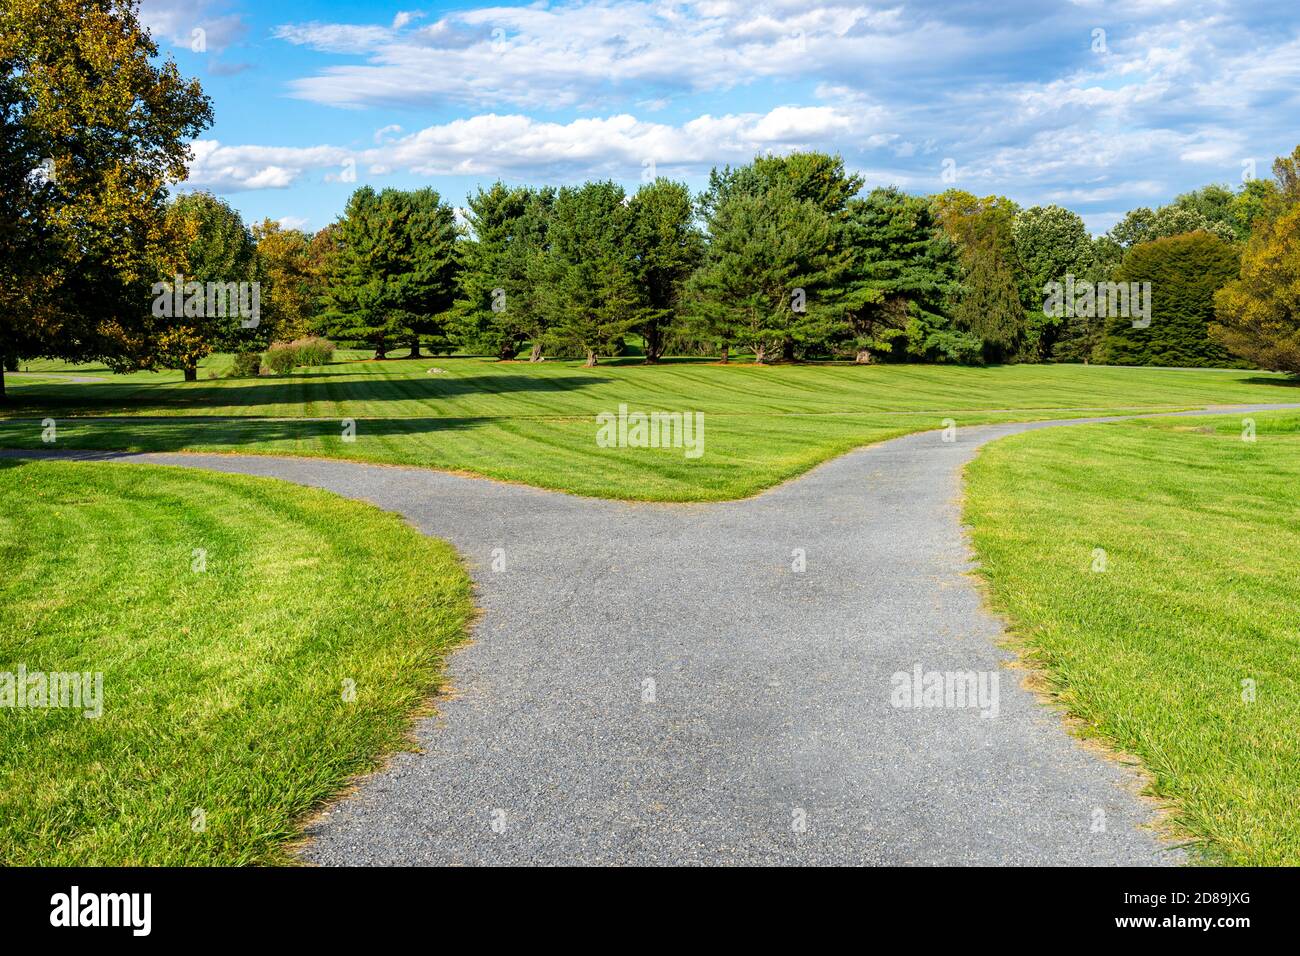 Split walking path in a park with grass and trees Stock Photo